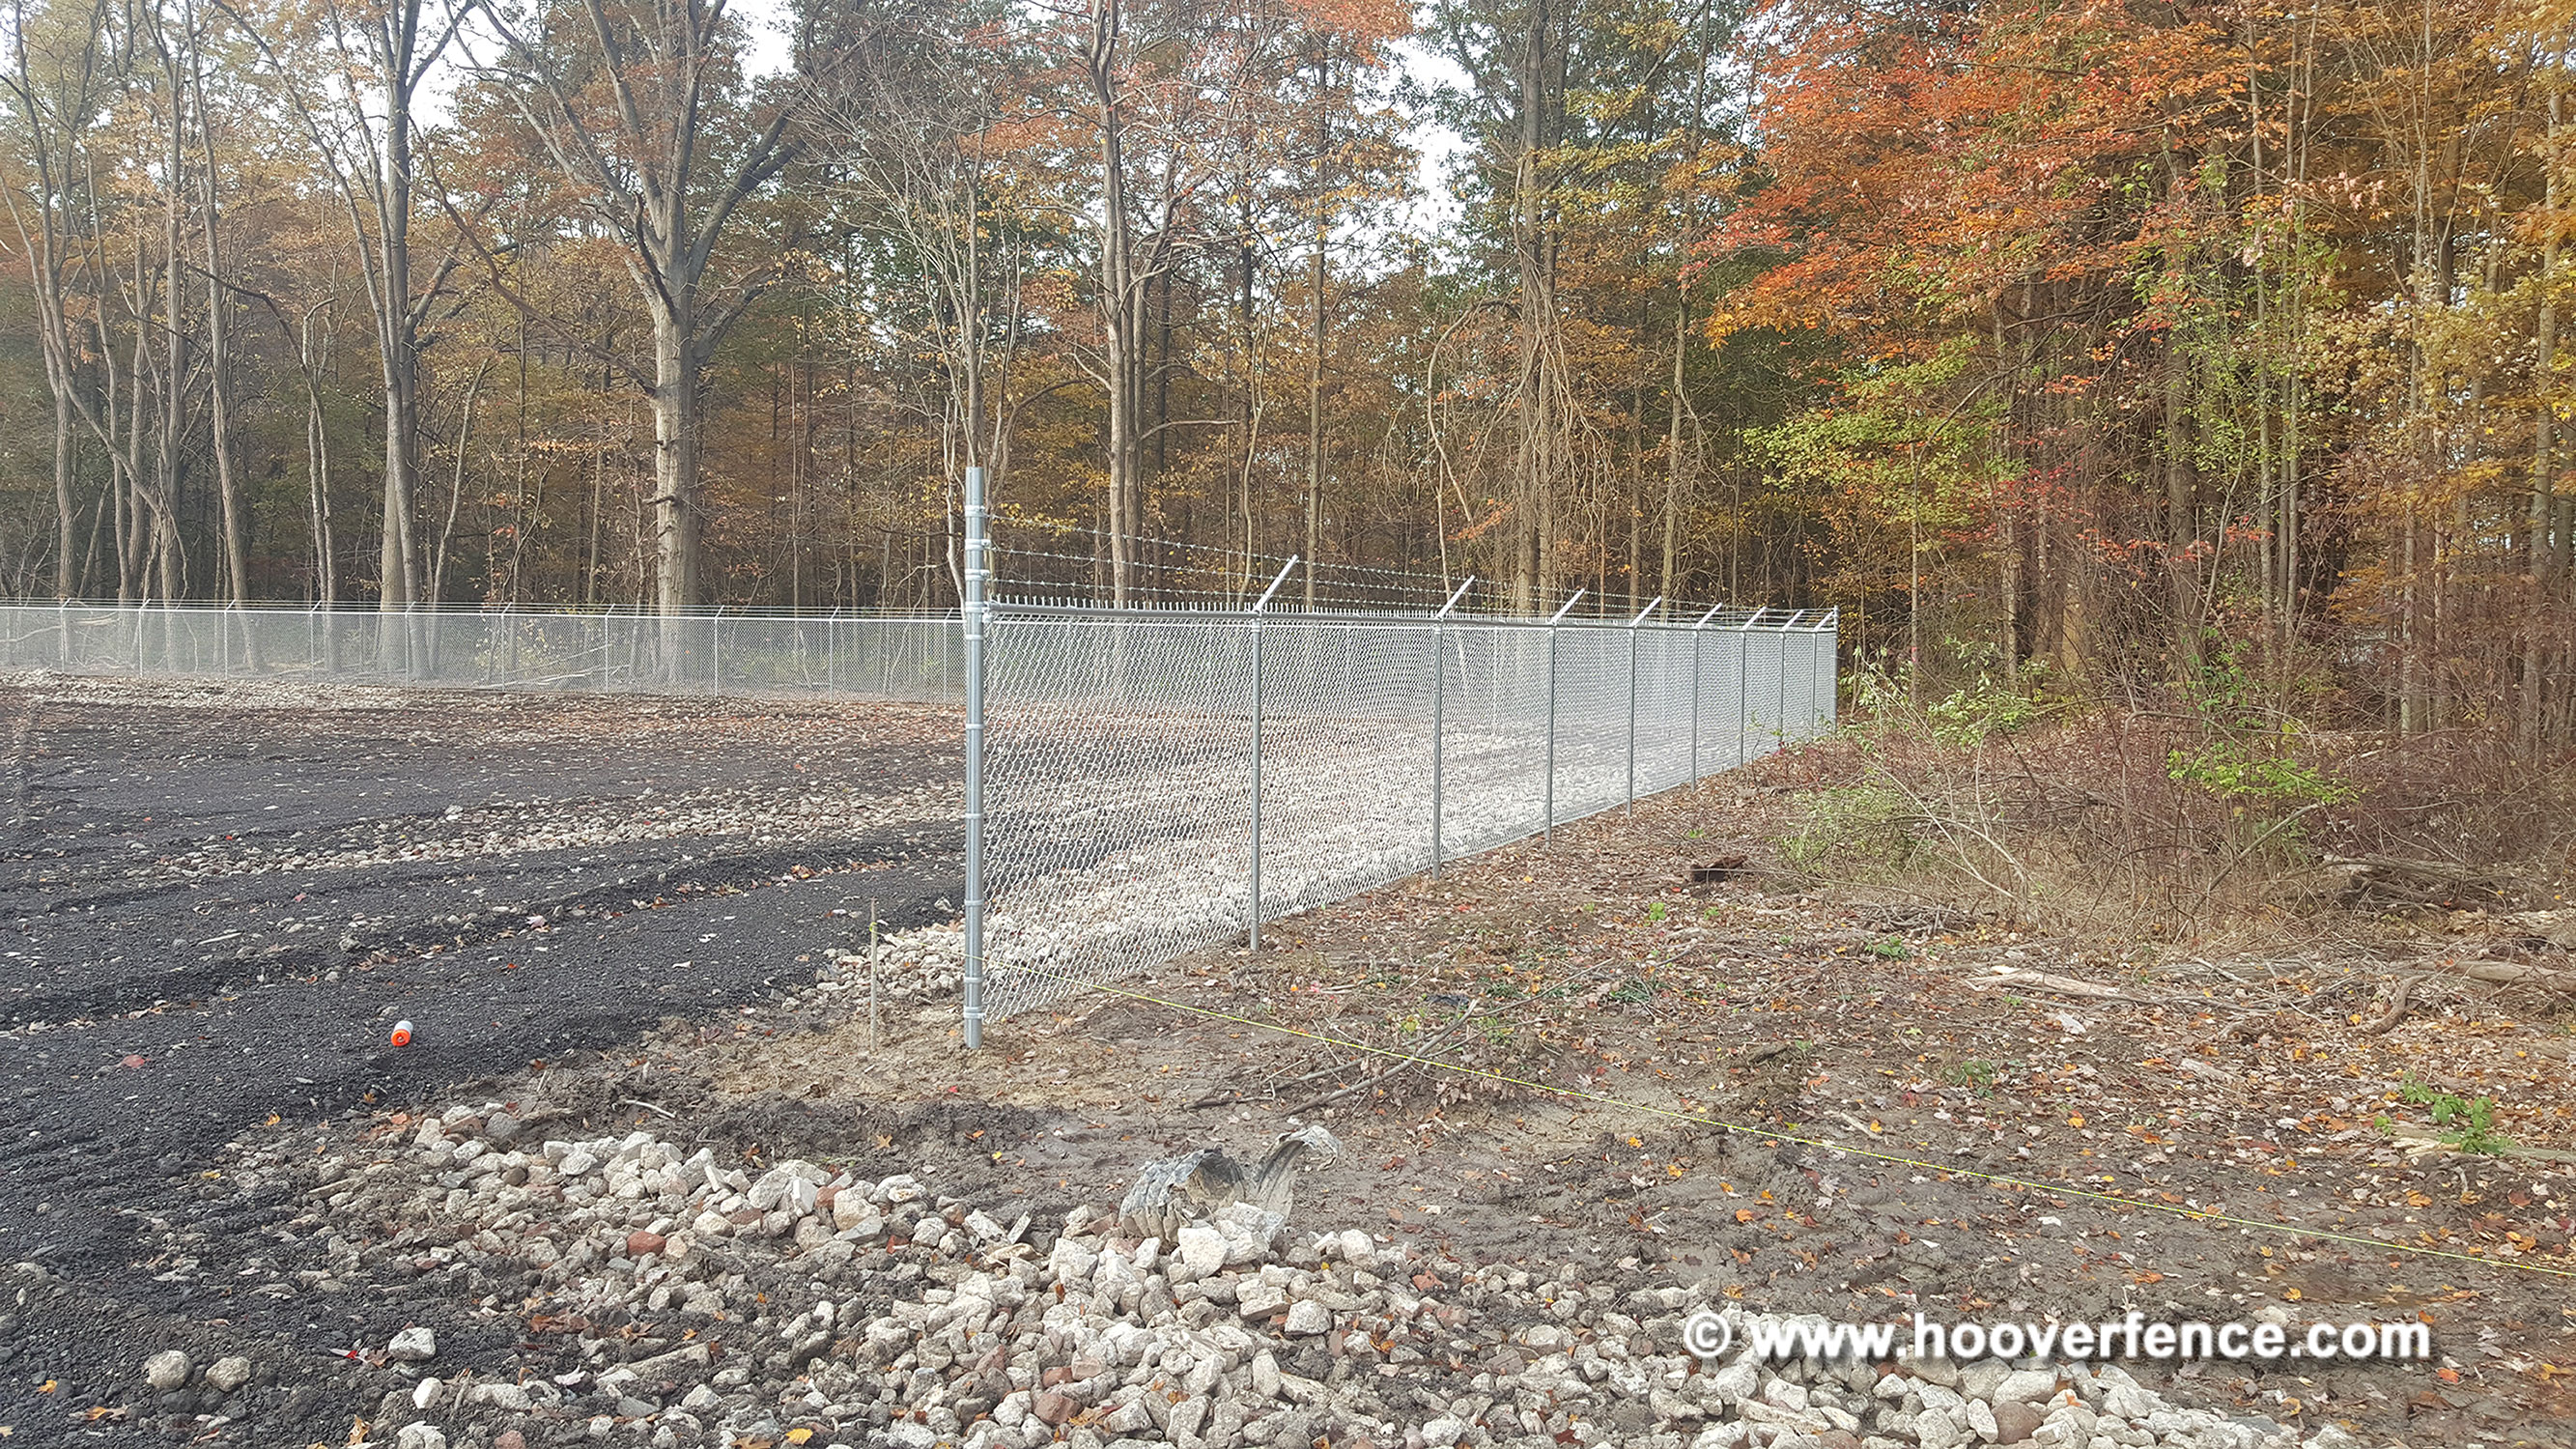 6' High Chain Link Fence with Barbed Wire Installation - Atwater, Ohio